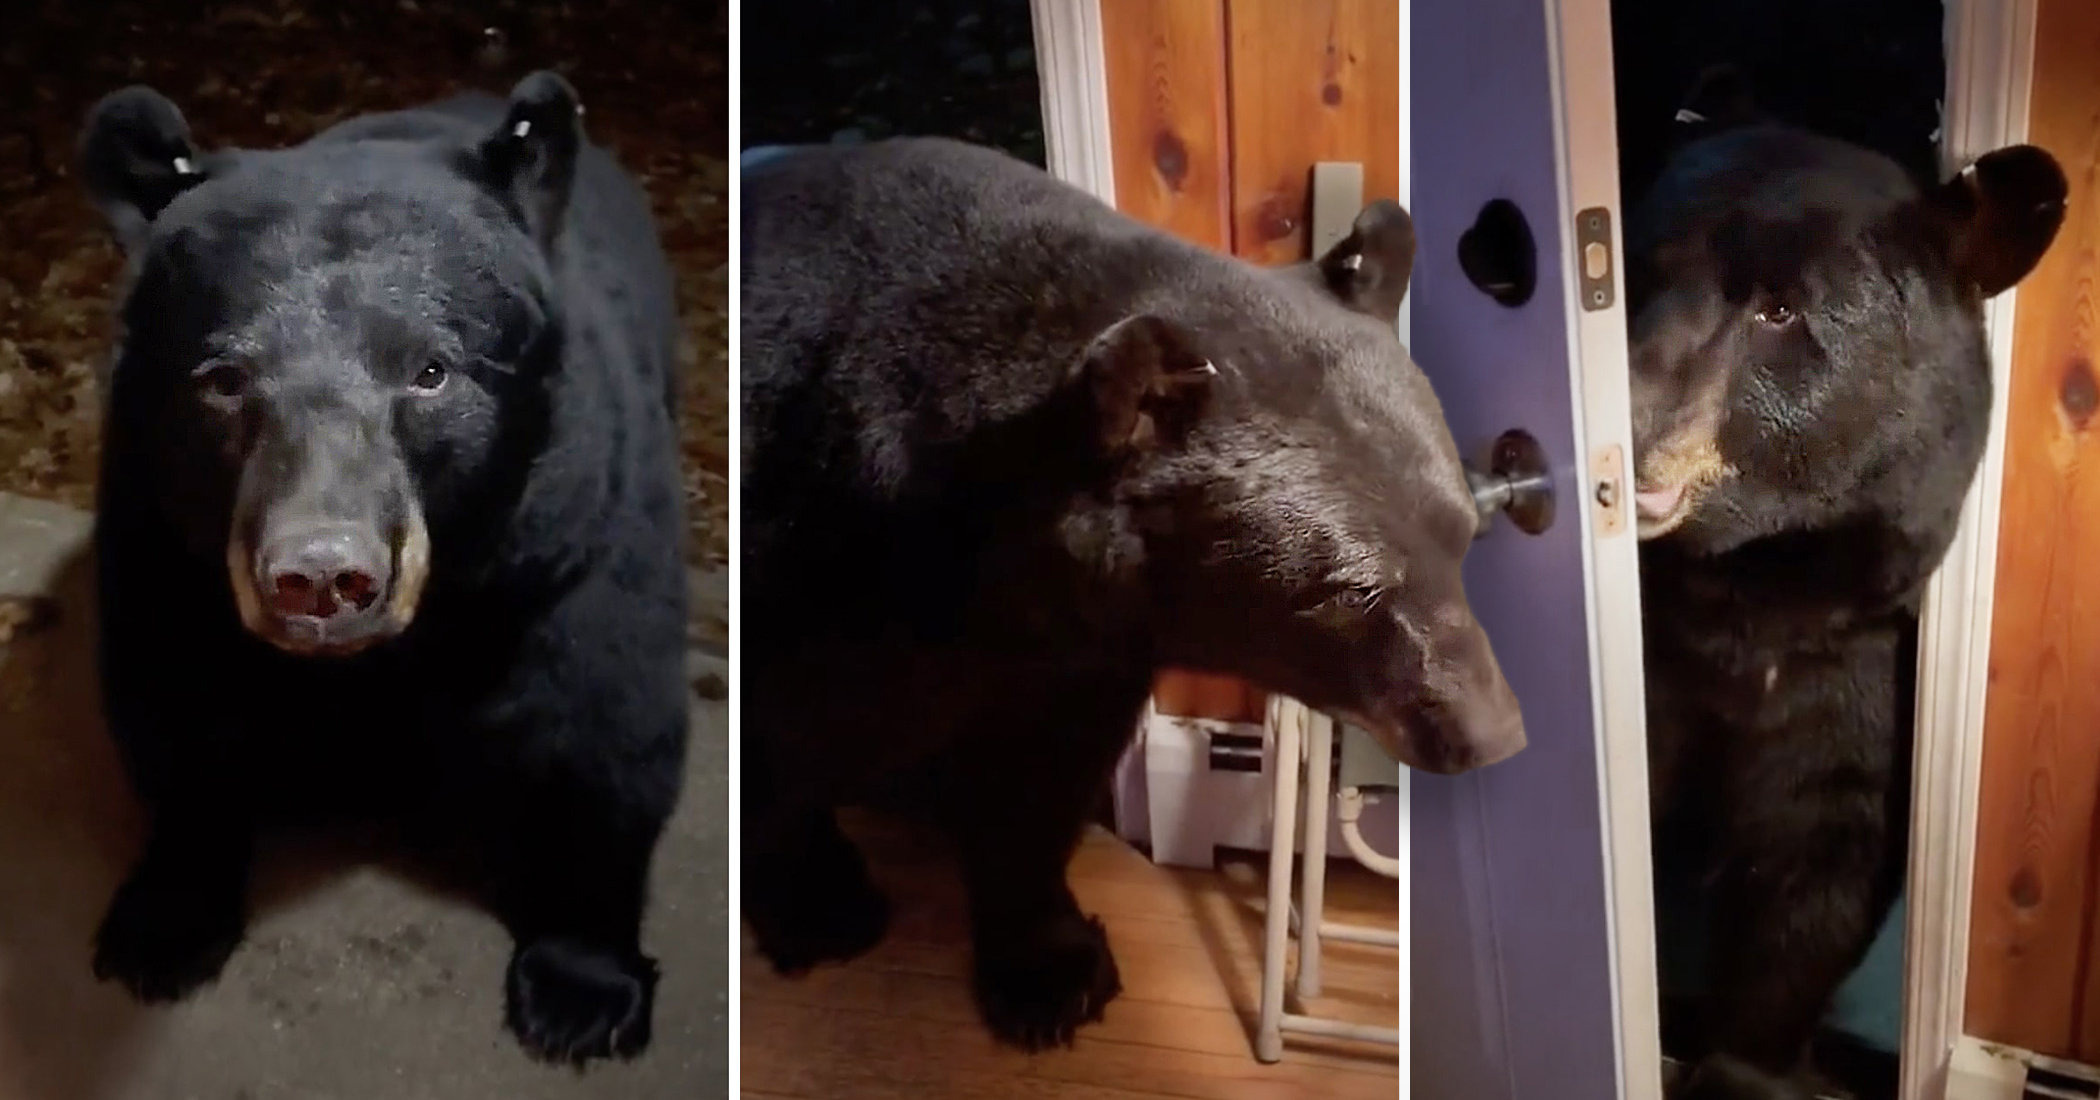 A New Jersey woman asks the intruder bear to shut her door, and the friendly beast does